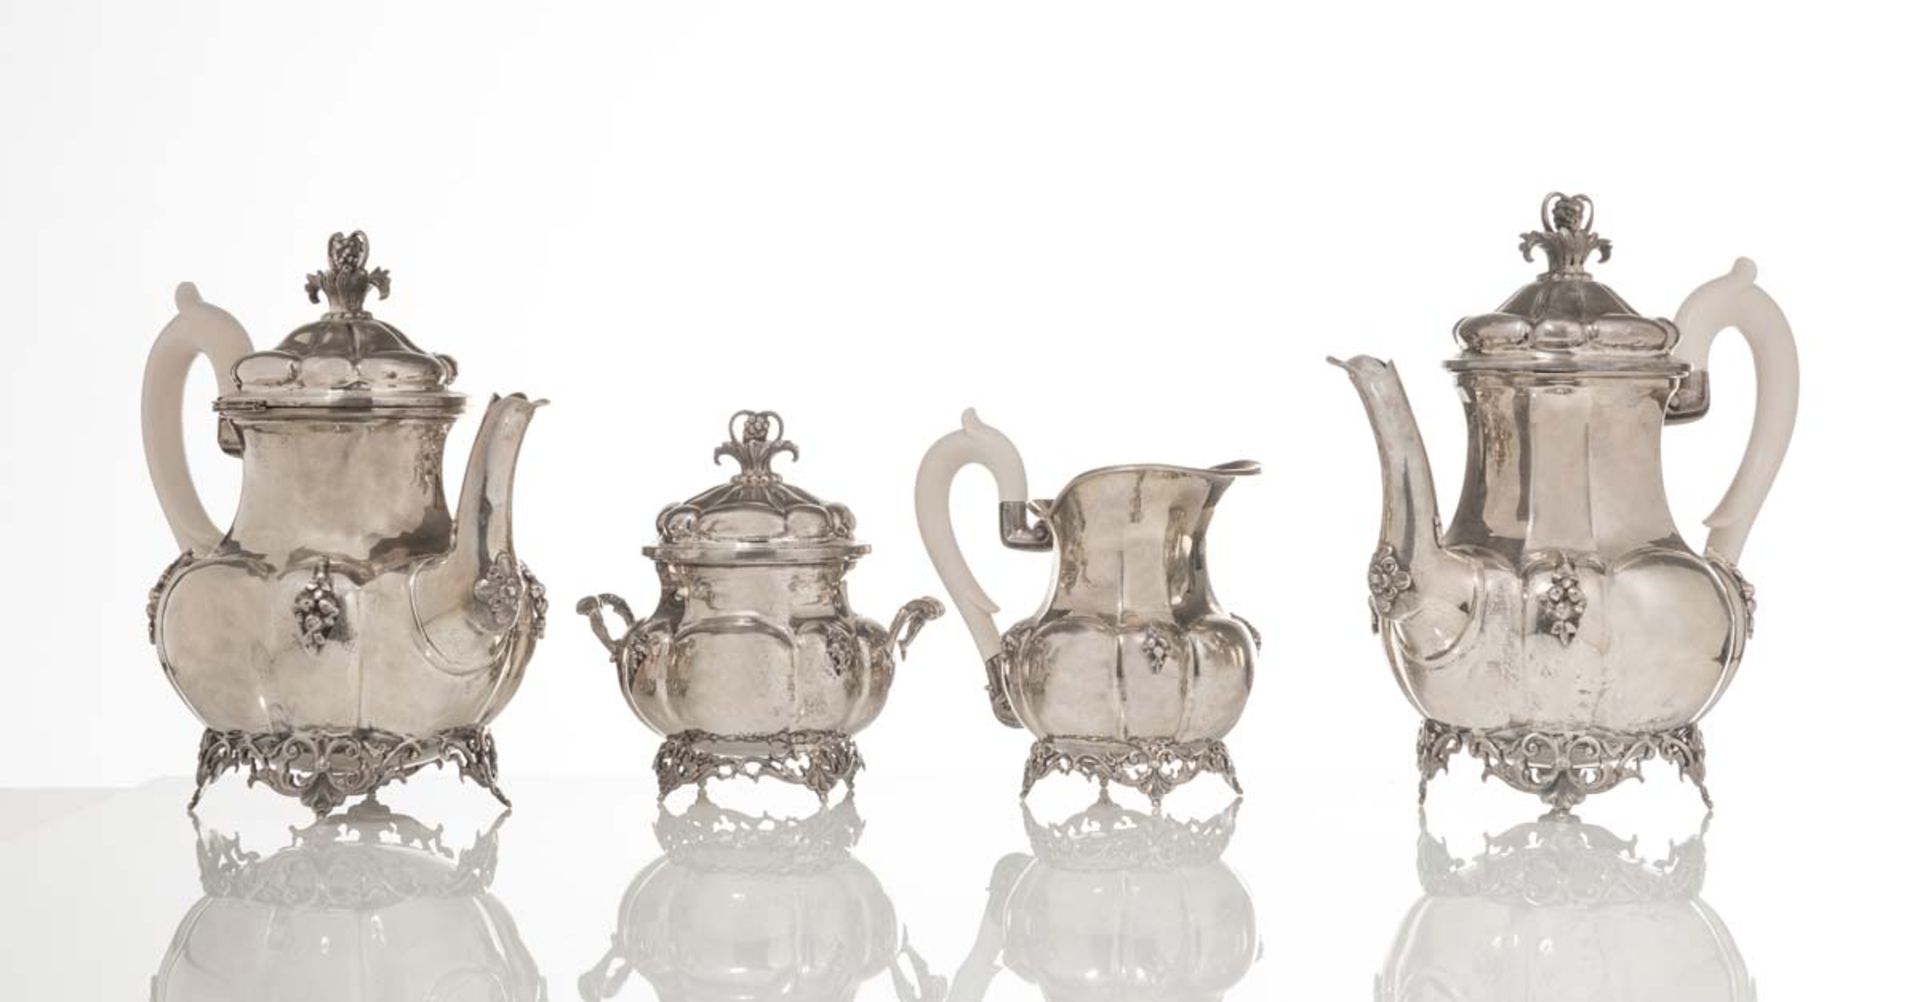 Silver and ivory Tea Service with coffee pot, tea pot, covered sugar and creamer, Italy.